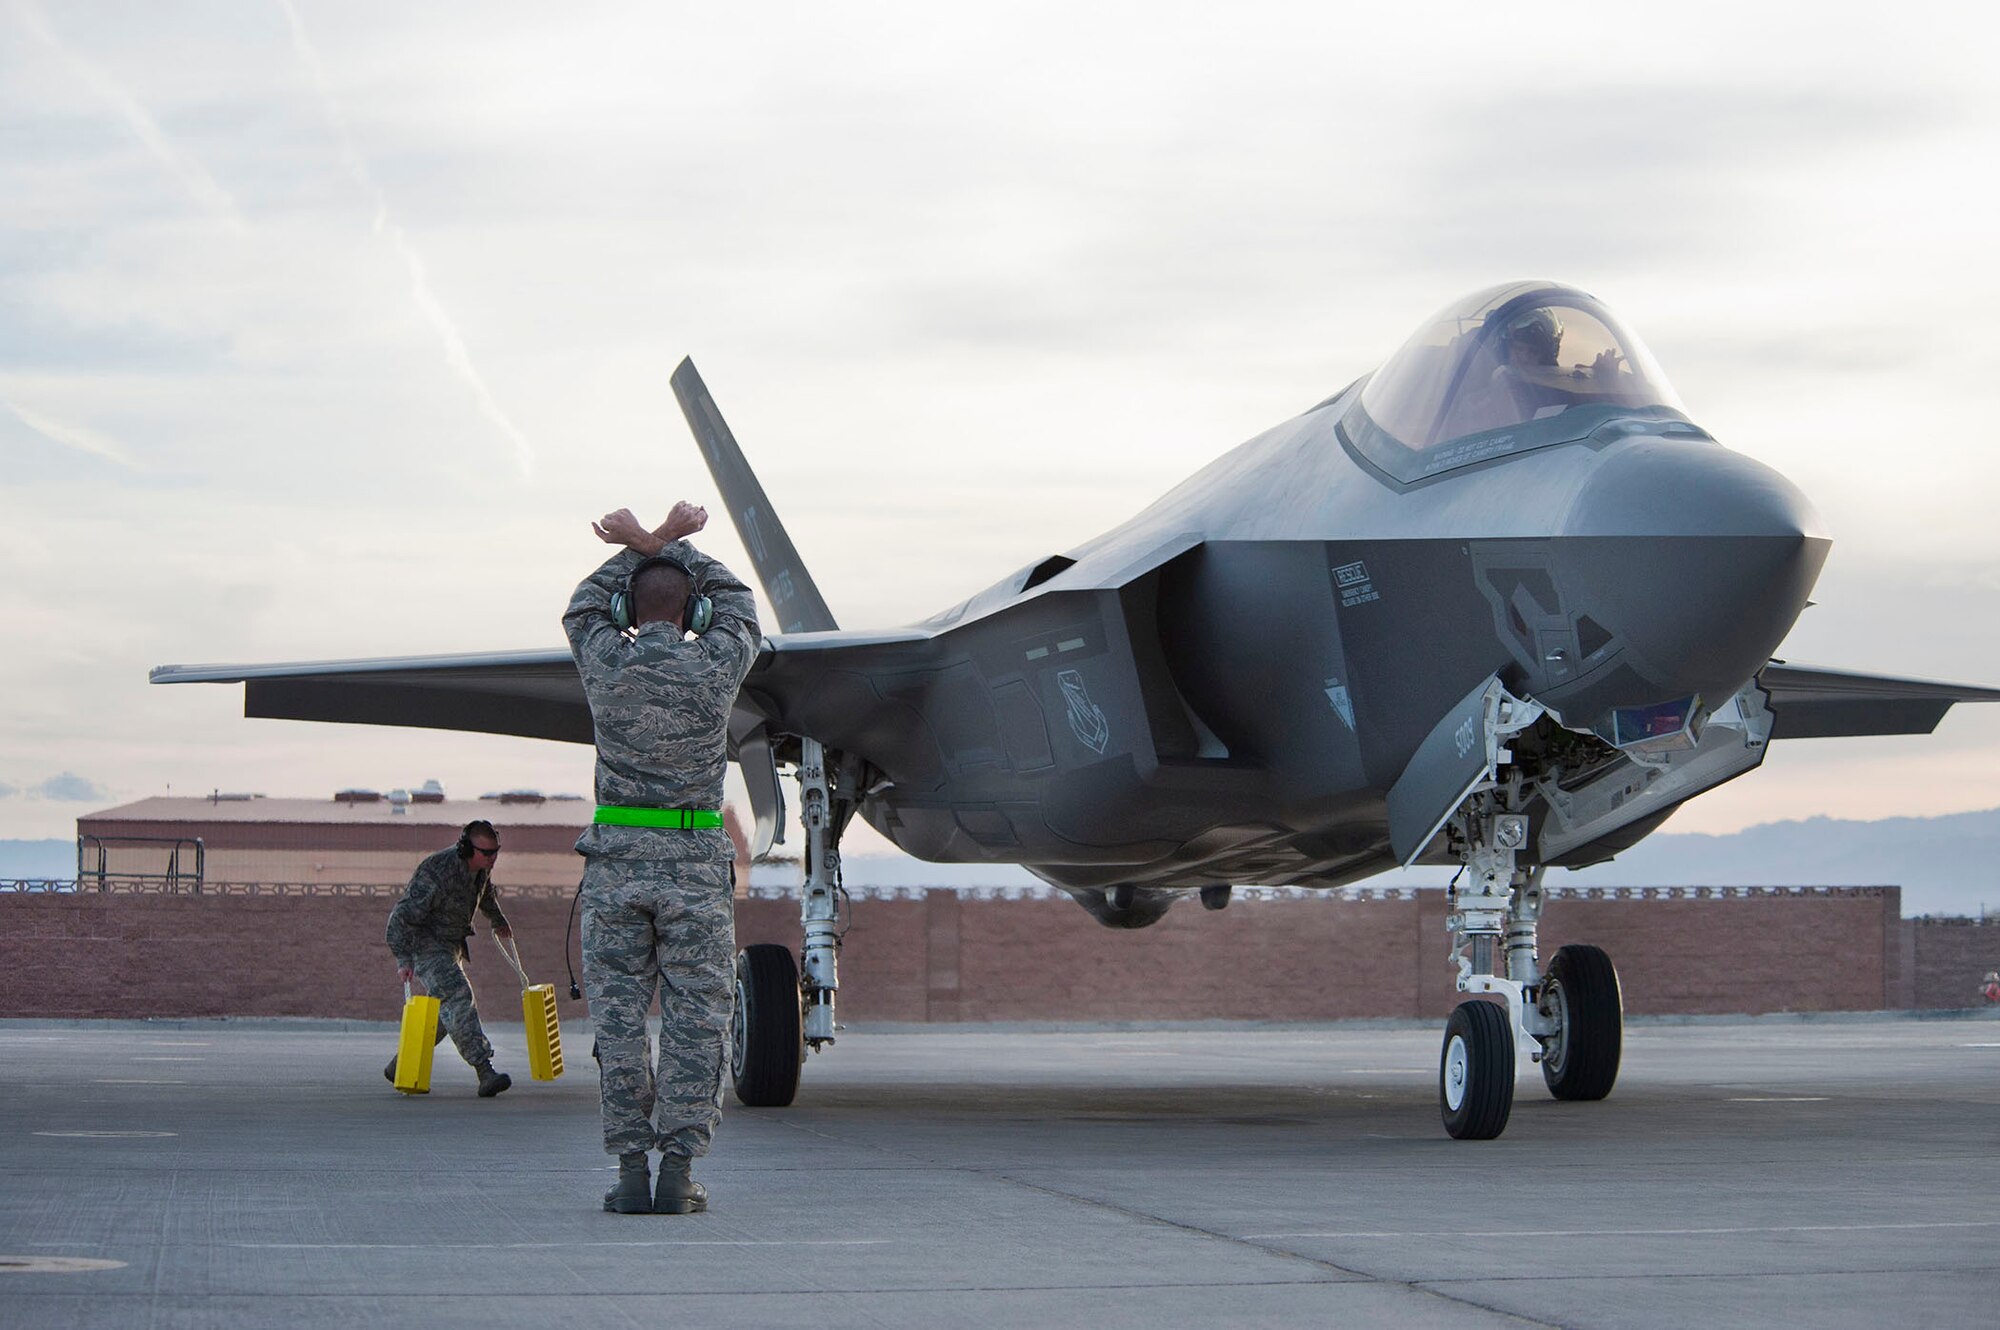 Crew chiefs from the 57th Wing Lightning Aircraft Maintenance Unit marshal an F-35 Lighting II, March 6, 2013, at Nellis Air Force Base, Nev. The first two aircraft will be assigned to the 422nd Test and Evaluation Squadron. (U.S. Air Force photo/Lawrence Crespo)